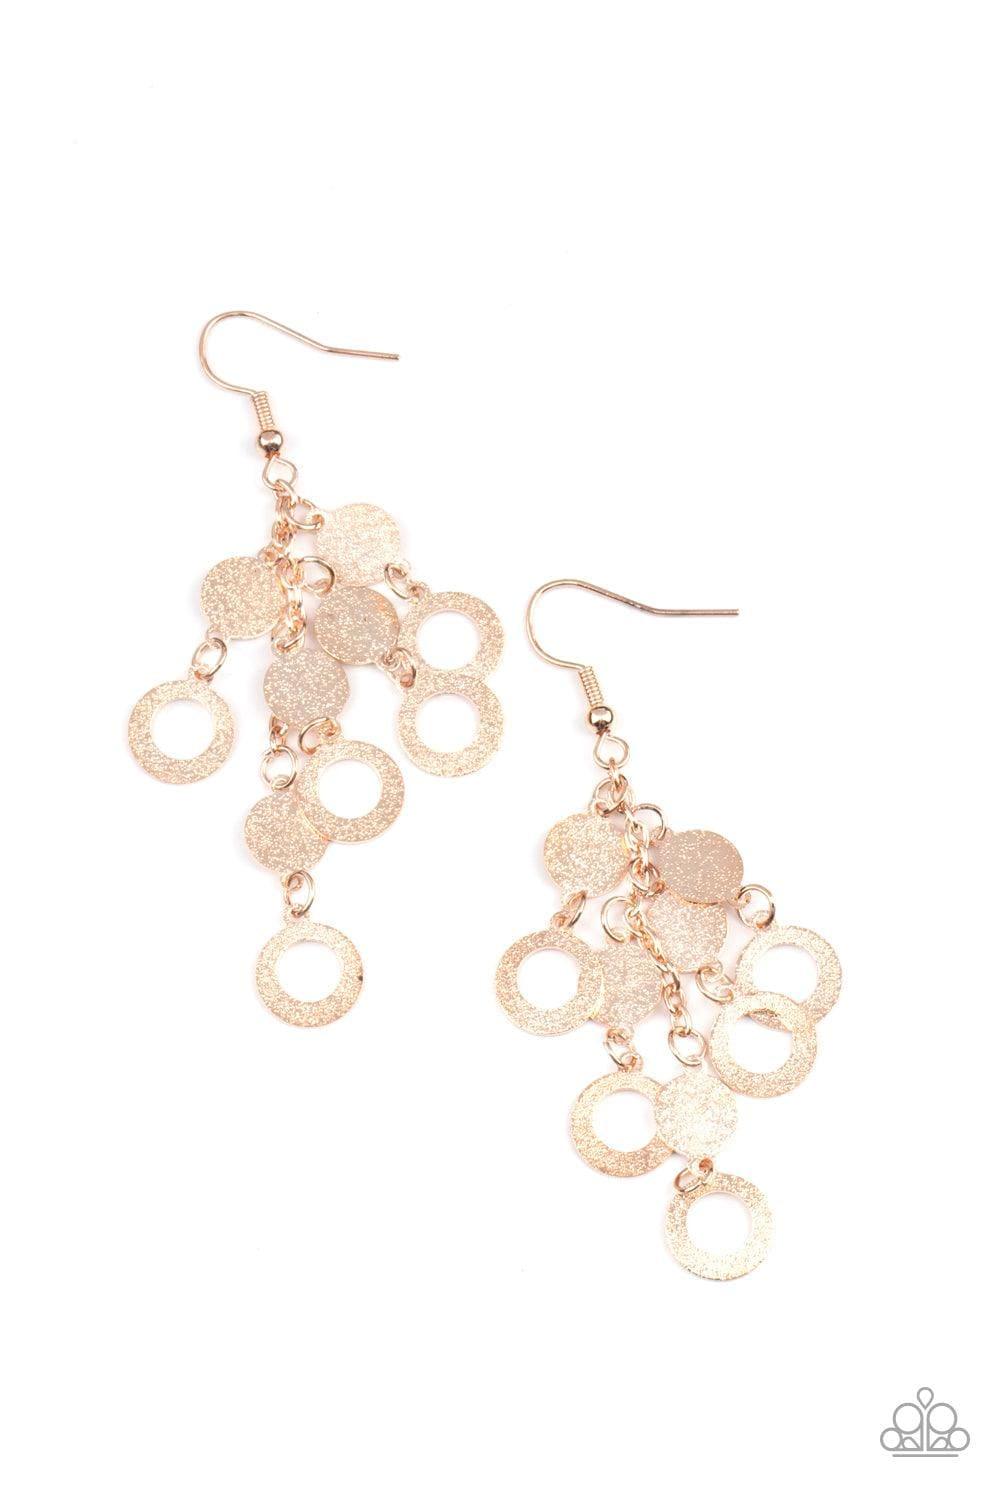 Paparazzi Accessories - Im Always Bright - Rose Gold Earrings - Bling by JessieK